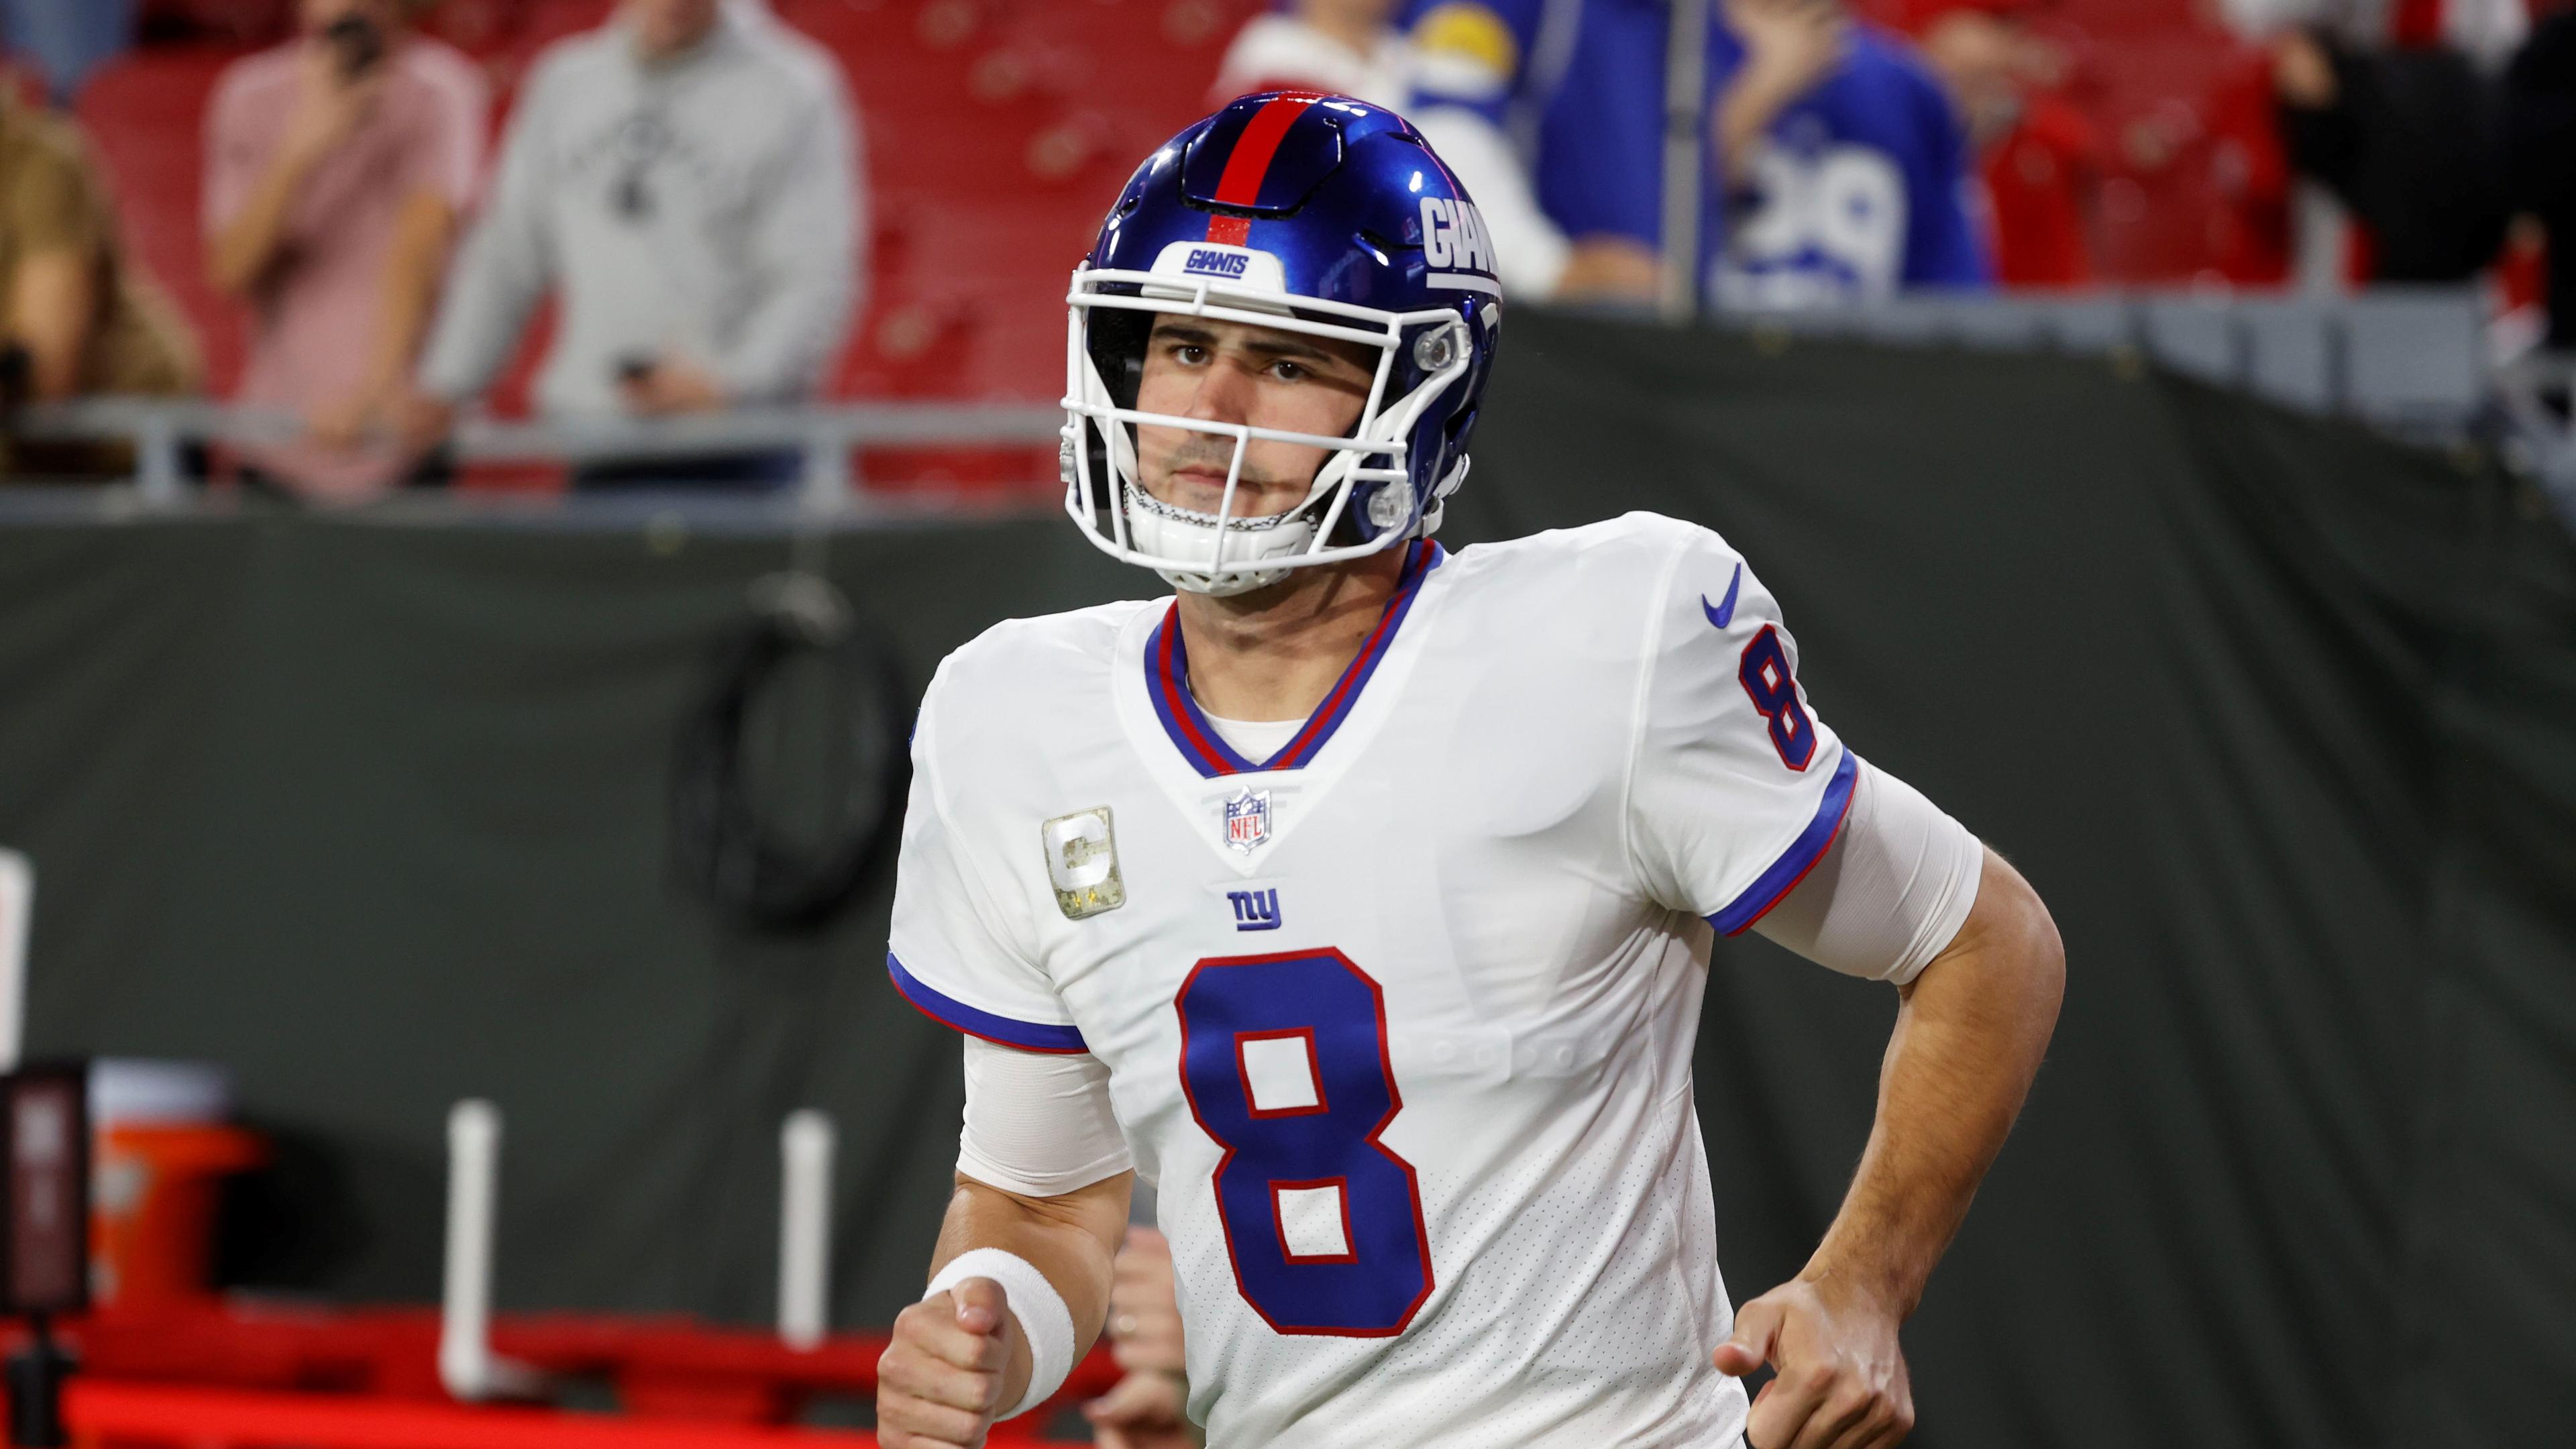 New York Giants quarterback Daniel Jones (8) runs out prior to the game against the Tampa Bay Buccaneers at Raymond James Stadium. / Kim Klement-USA TODAY Sports